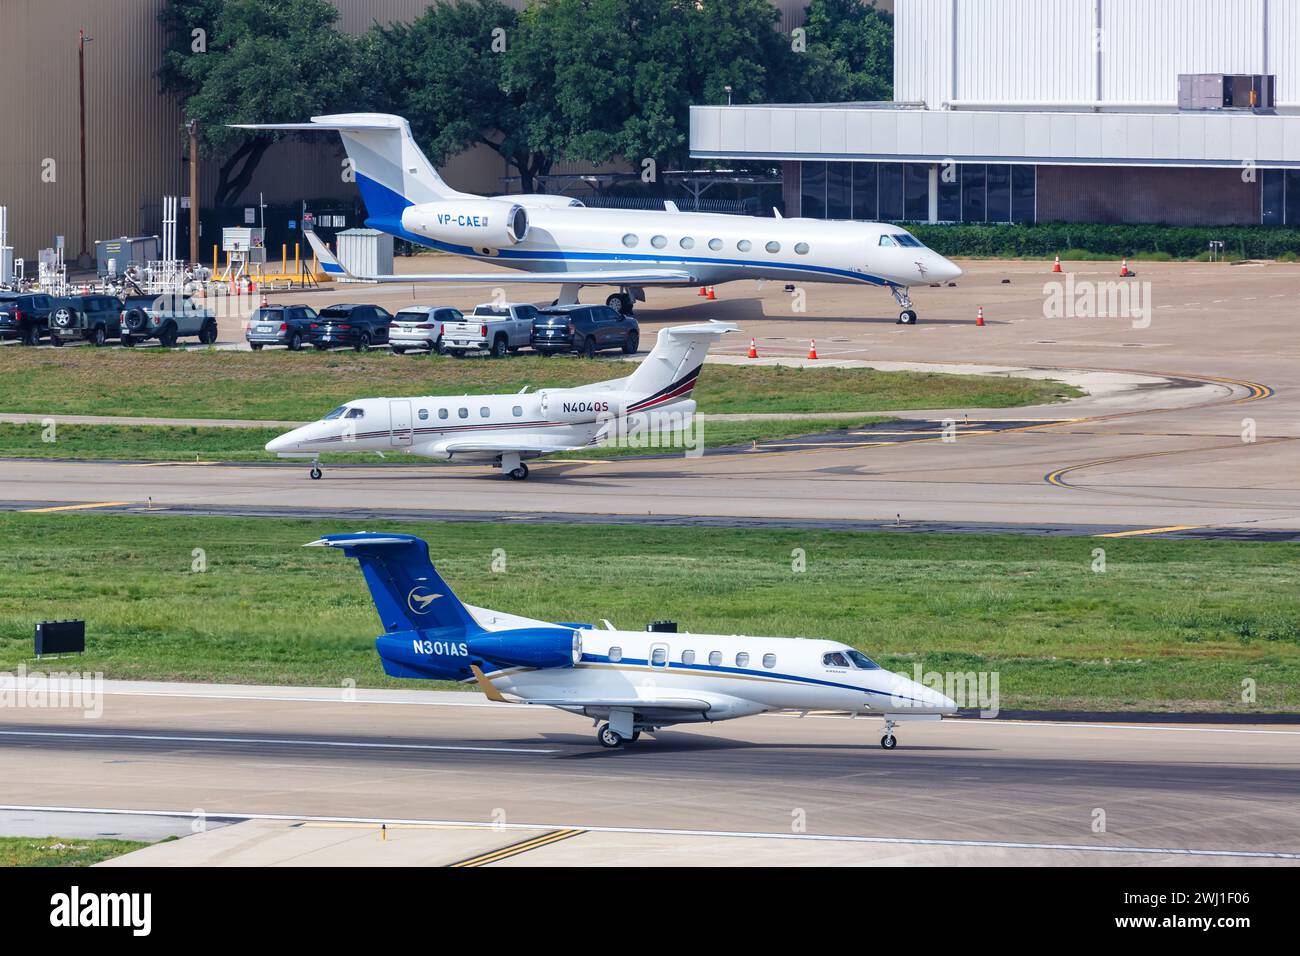 Private jets Embraer Phenom 300 and Gulfstream G550 aircraft Dallas Love Field Airport in the USA Stock Photo